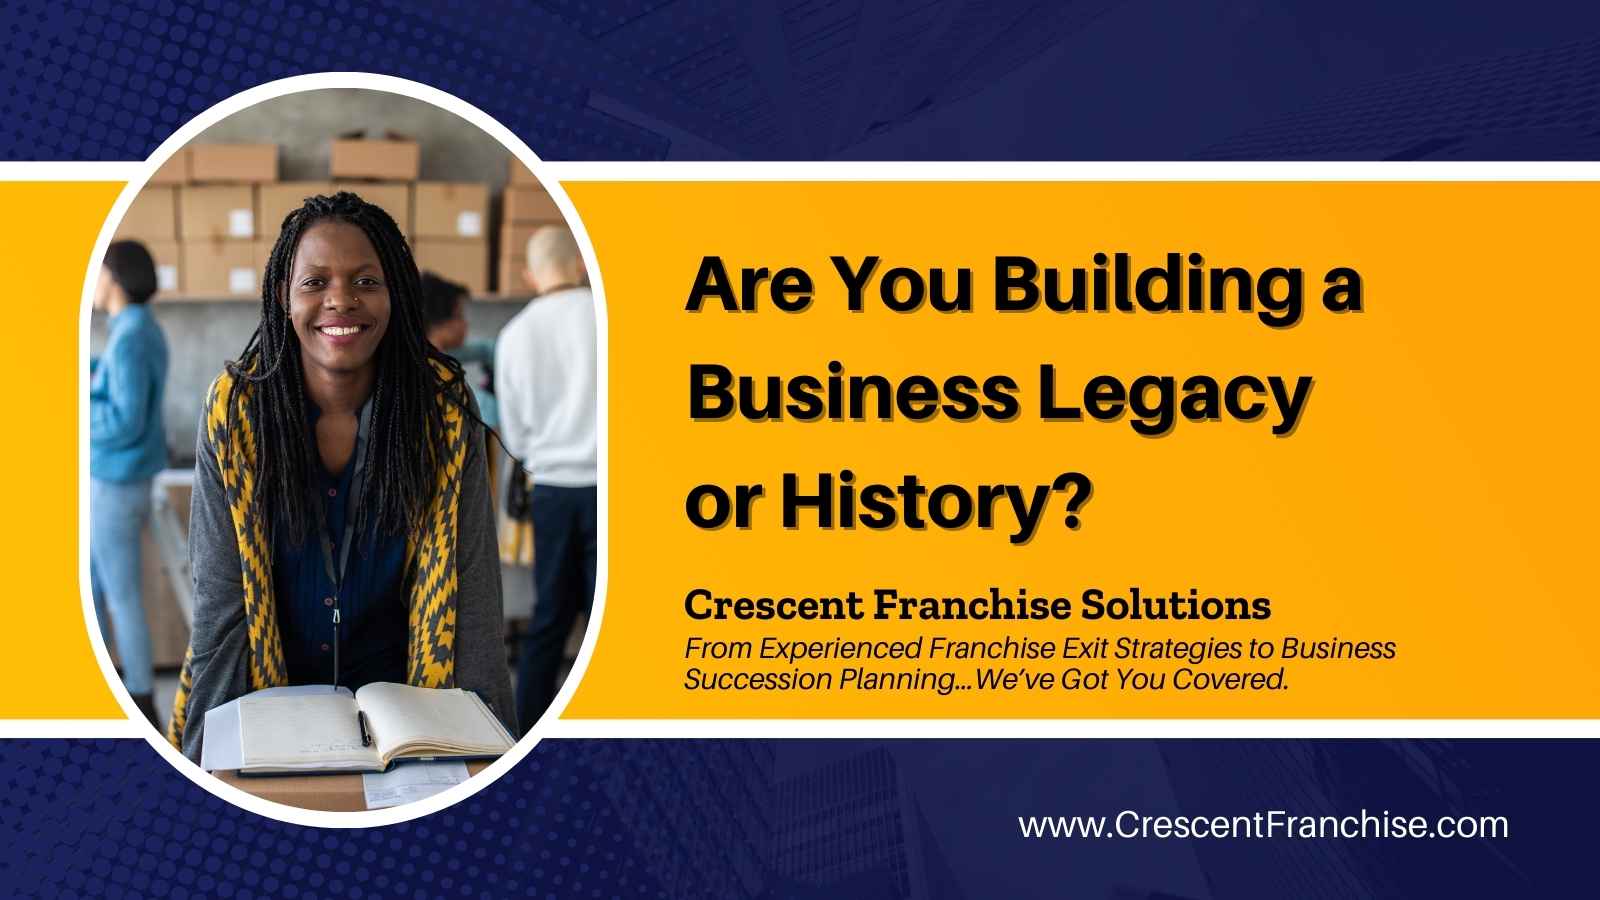 Are You Building a Business Legacy or History?